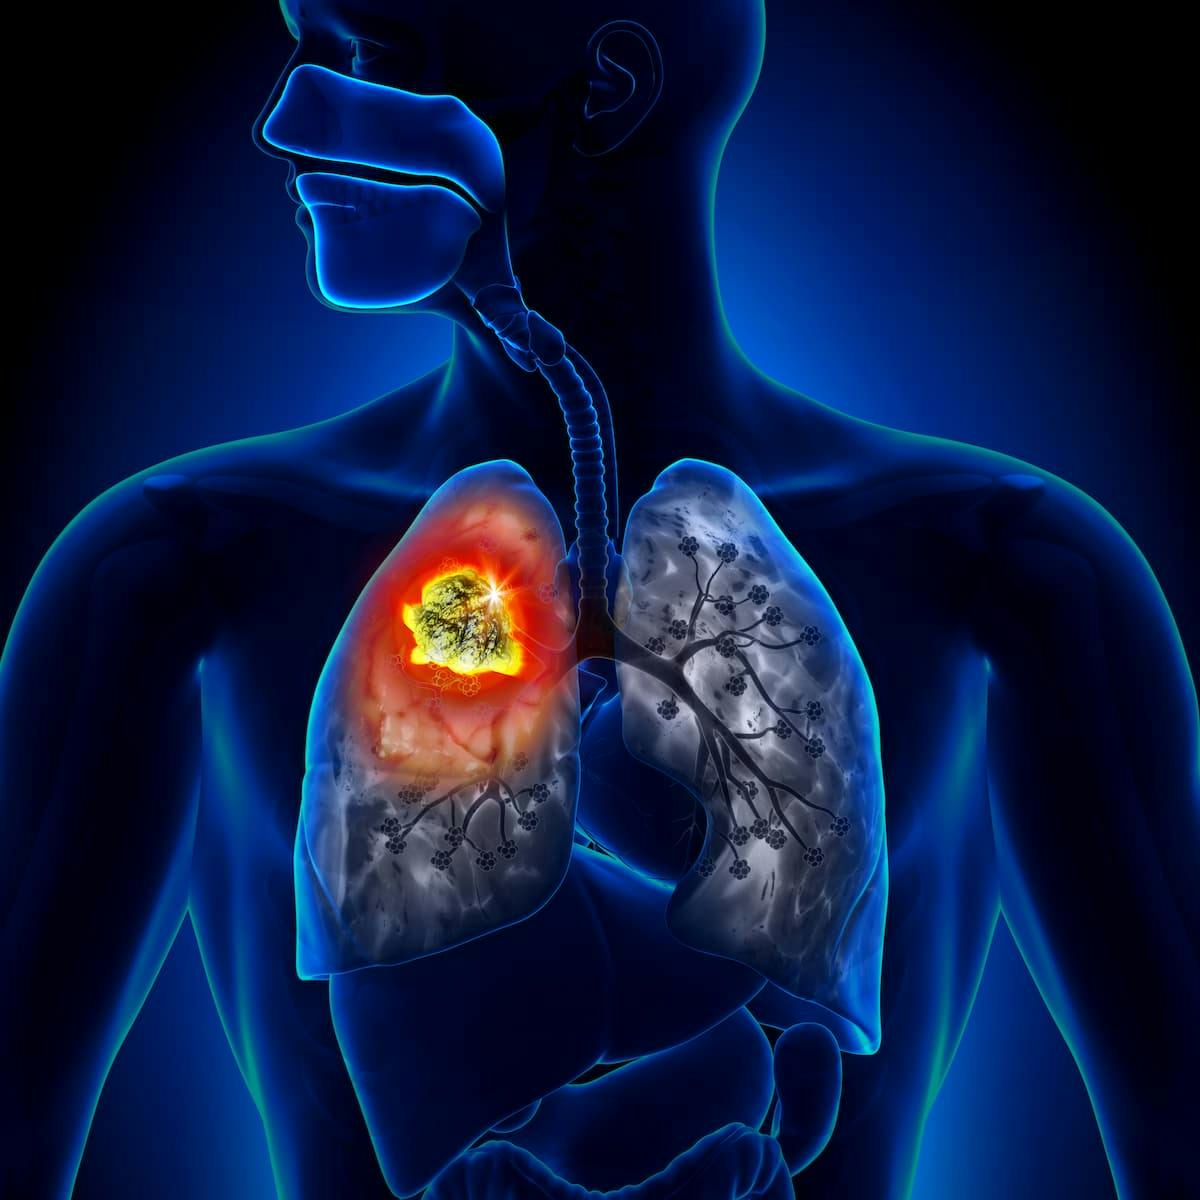 Data from the phase 3 PEARL trial indicated that durvalumab yielded a clinically significant improvement in overall survival but did not meet statistical significance among patients with stage IV non–small cell lung cancer with high PD-L1 expression.